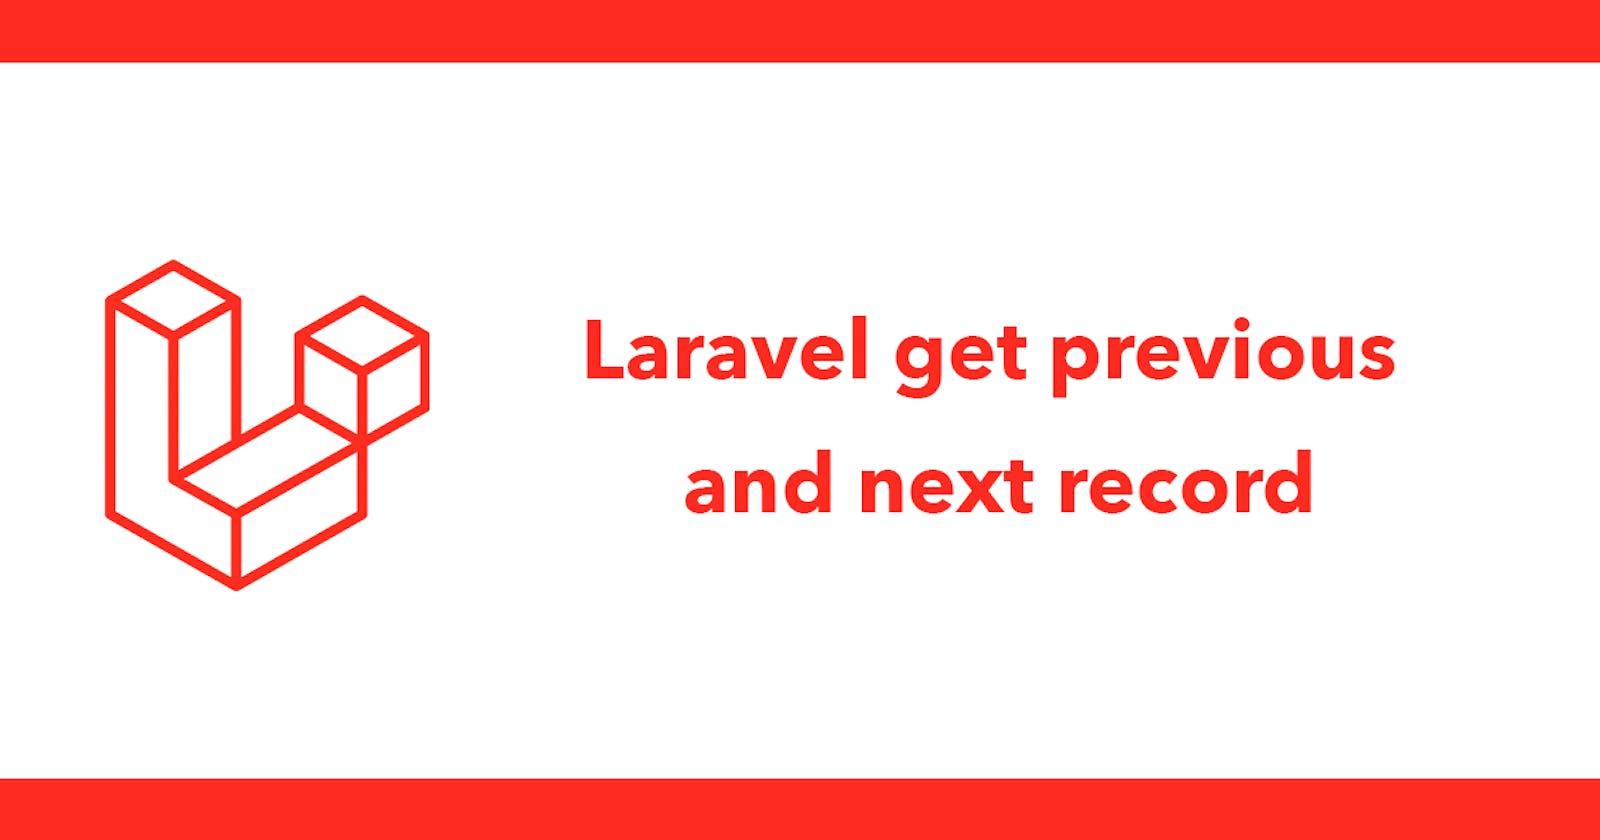 Laravel get previous and next record